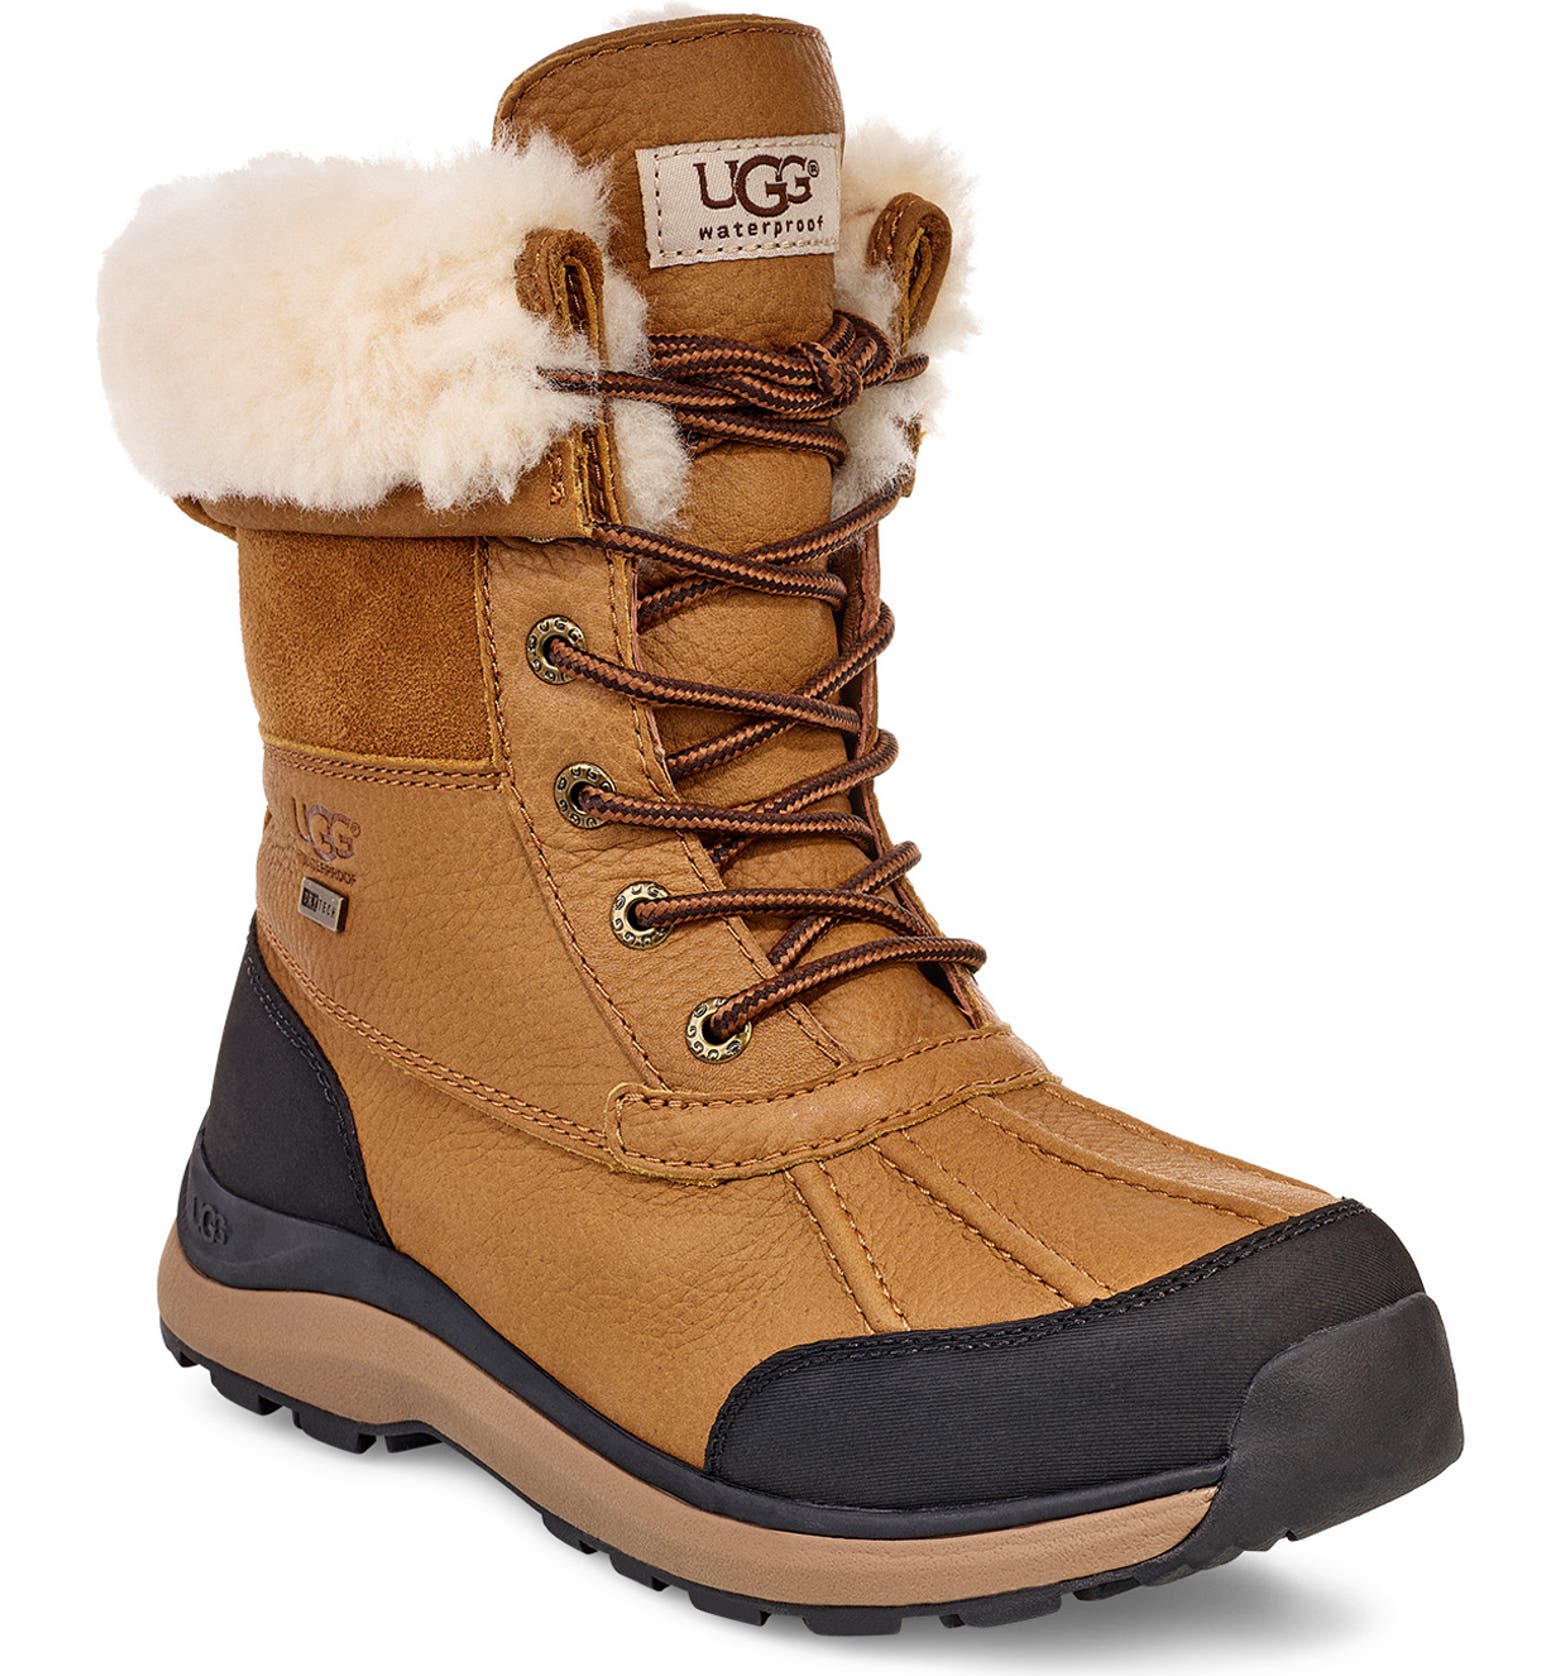 Uggs snow boots are a Nordstrom bestseller. Get ready for winter snowstorms with this warm and comfortable boot! 